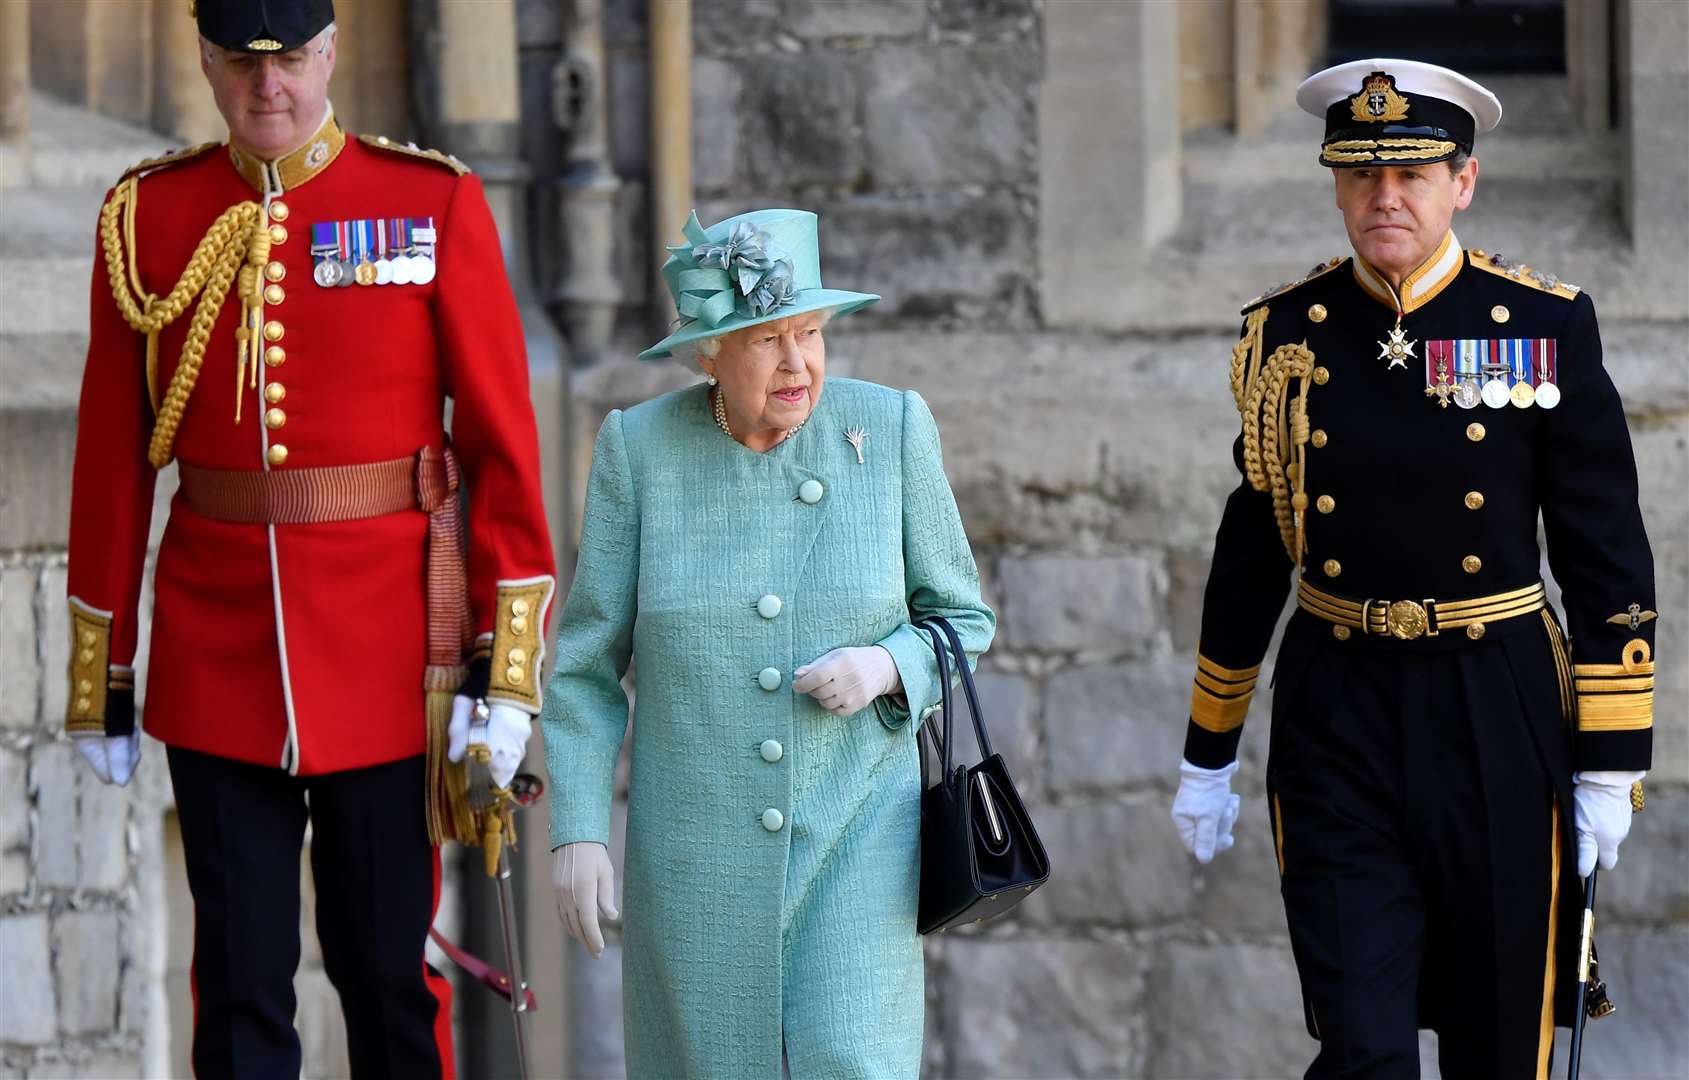 The event was the Queen’s first official public appearance since the lockdown was imposed (Toby Melville/PA)